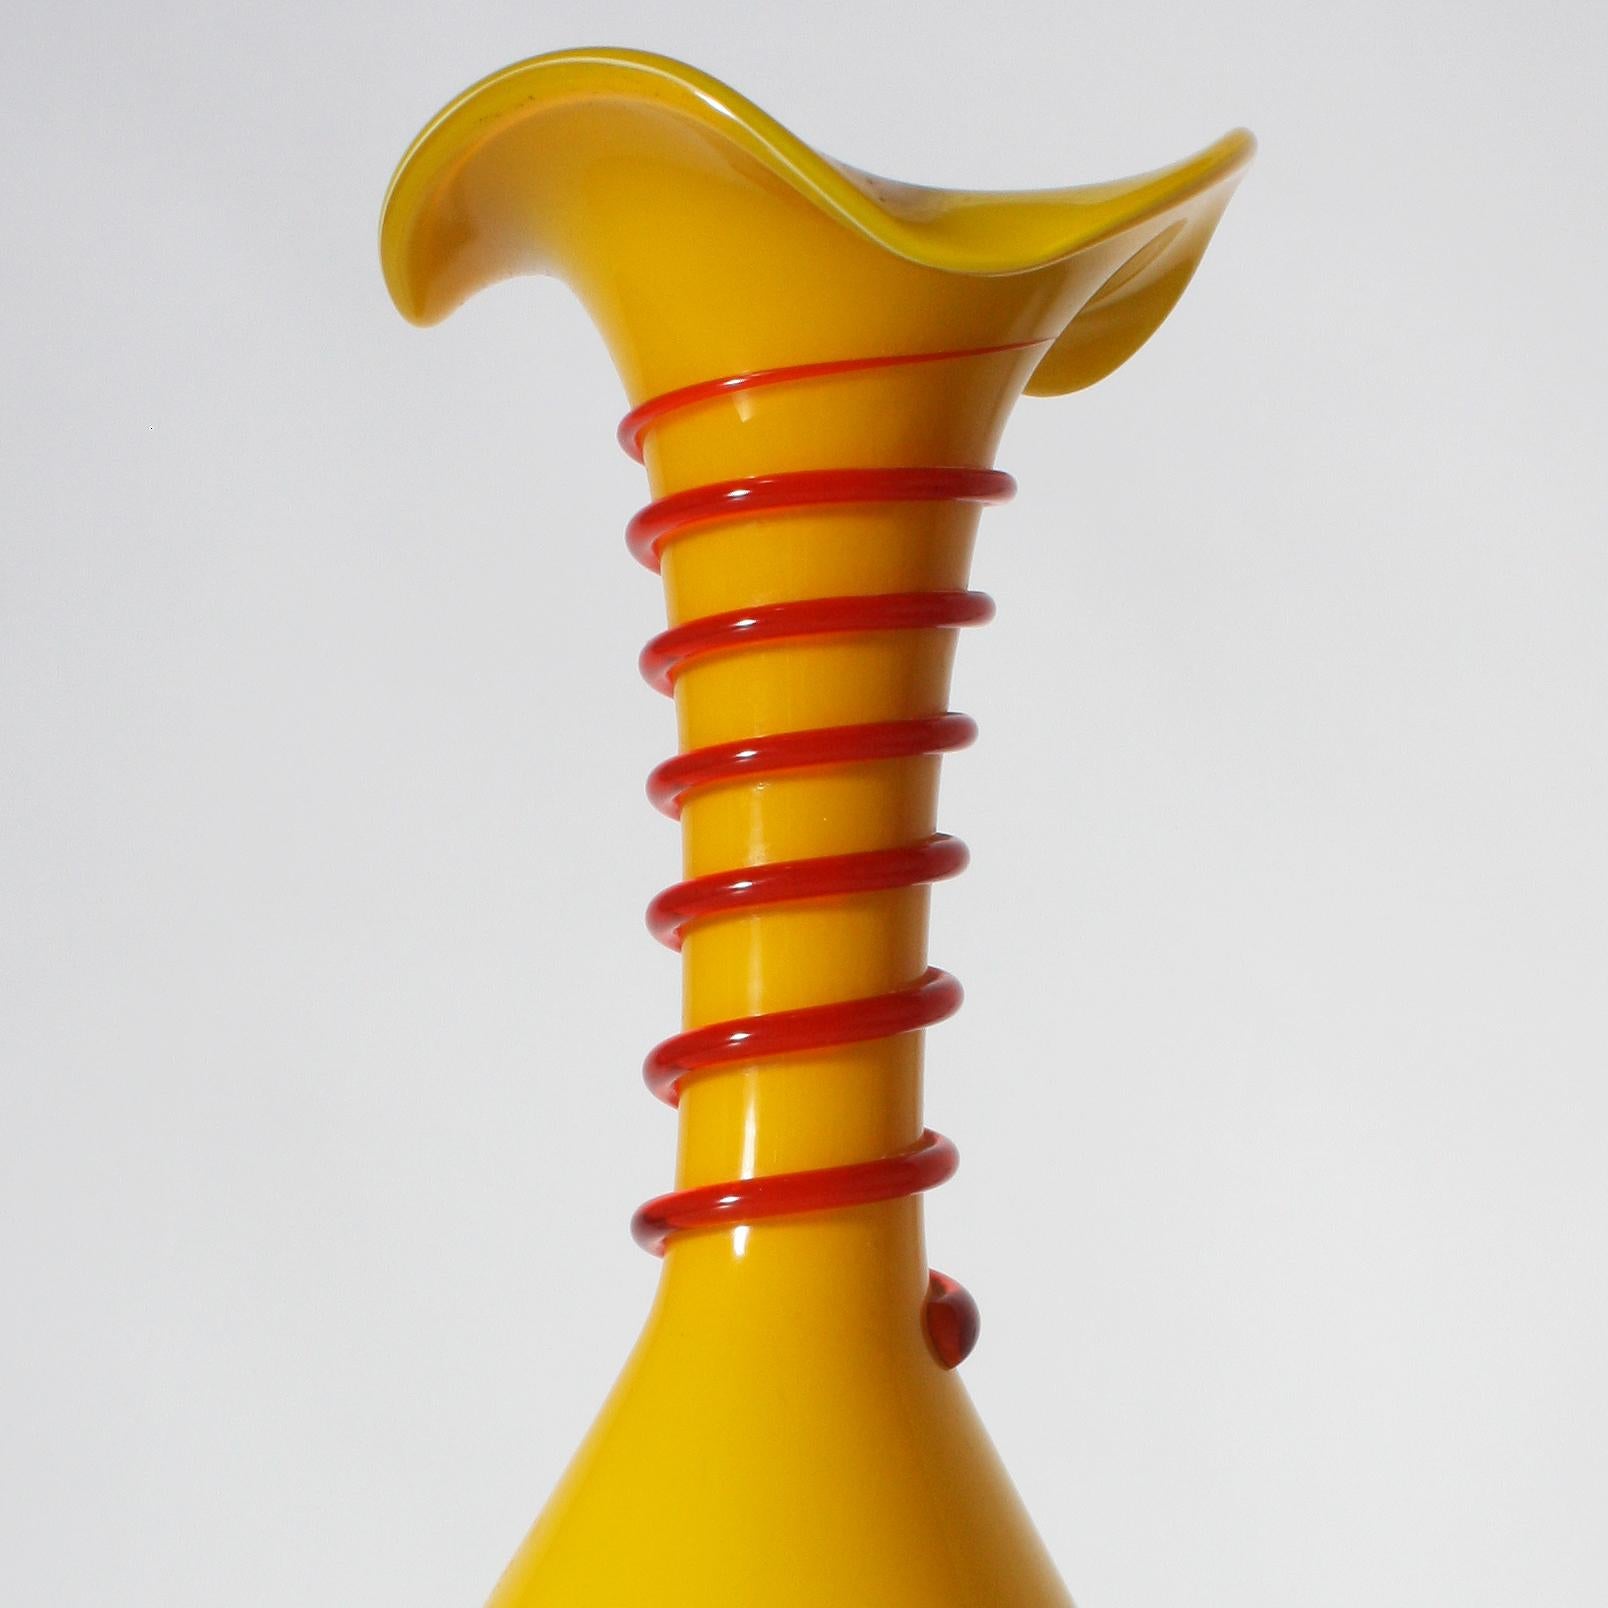 Yellow Murano vase with red rings, circa 1950.